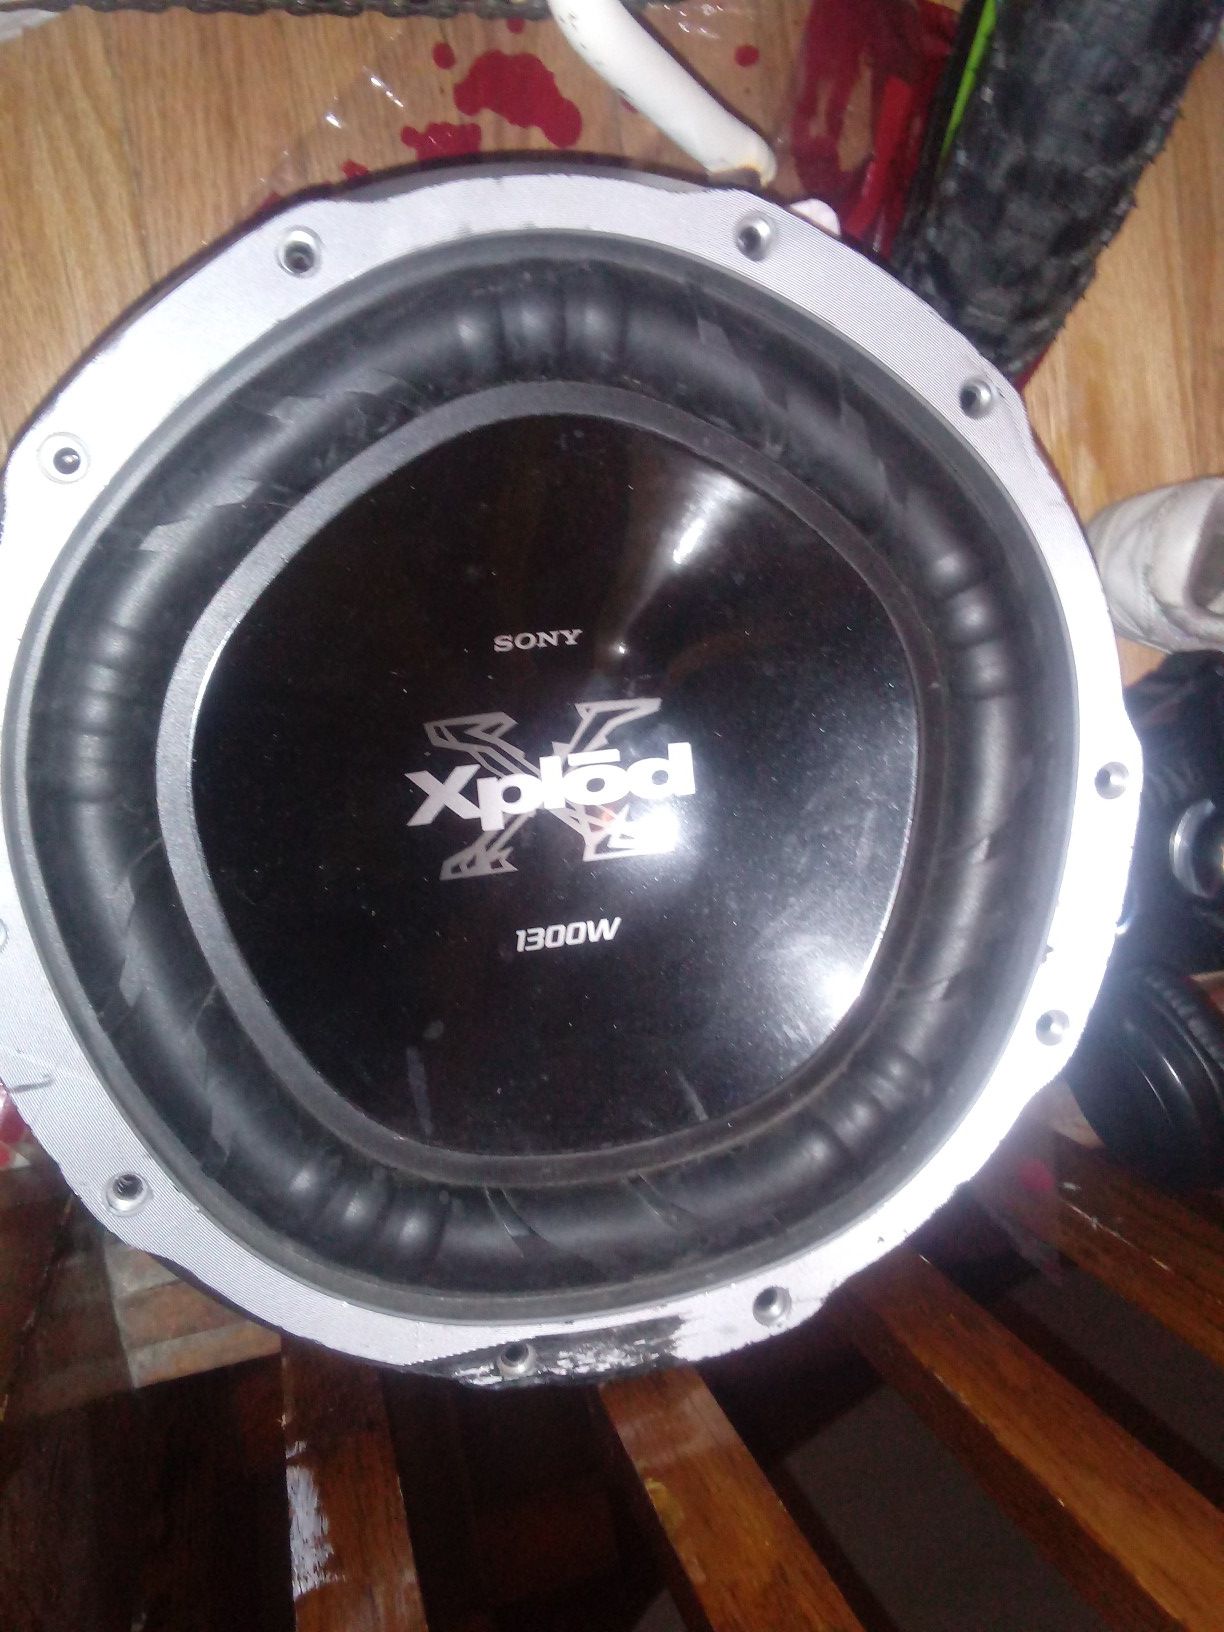 12" sony subwoofer